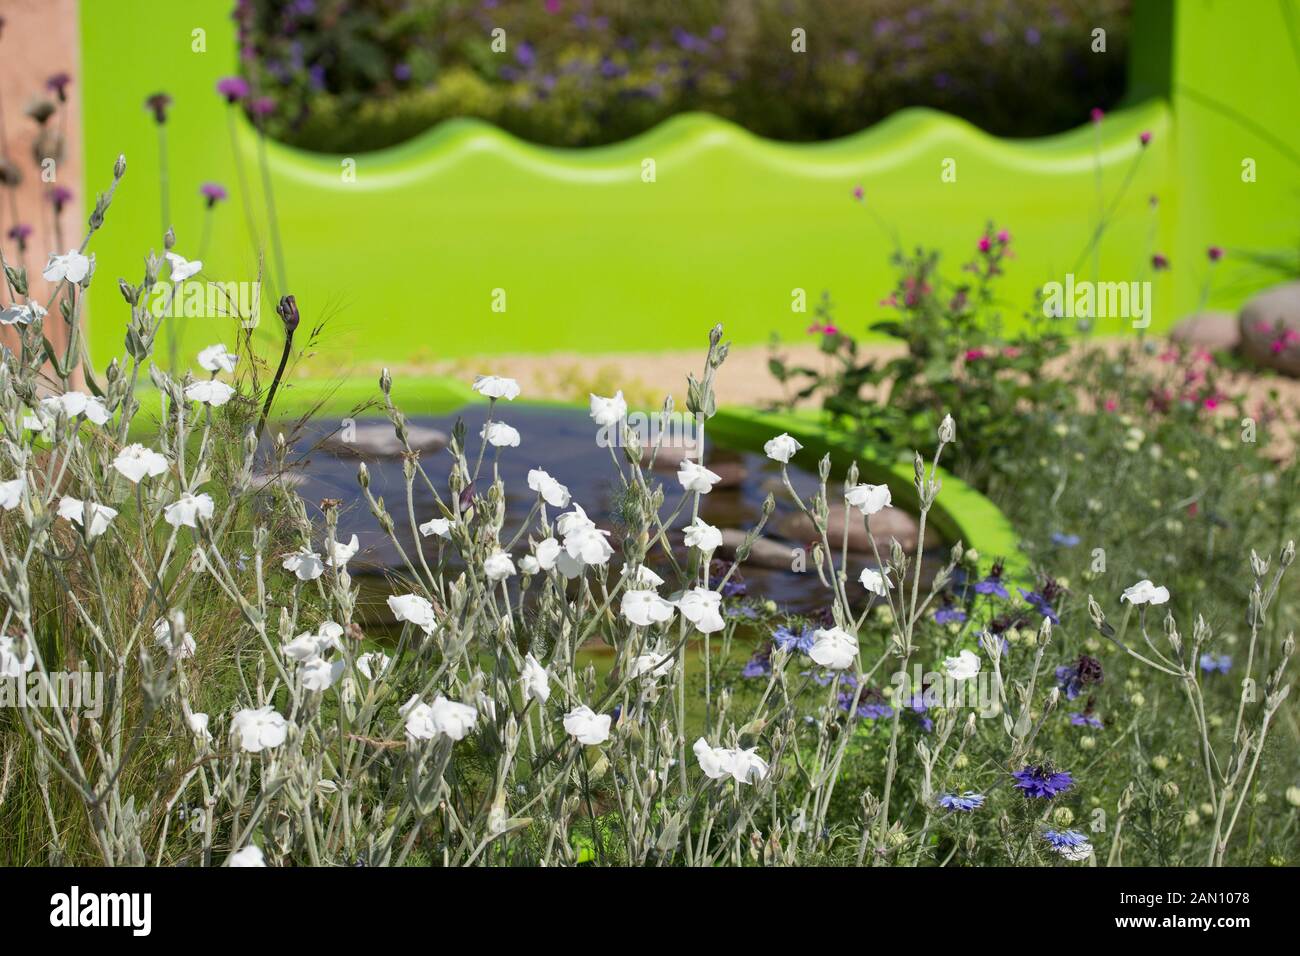 THE ECOVER GARDEN BY MATTHEW CHILDS  RHS HAMPTON COURT FLOWER SHOW  BEST IN SHOW AND GOLD MEDAL WINNER Stock Photo